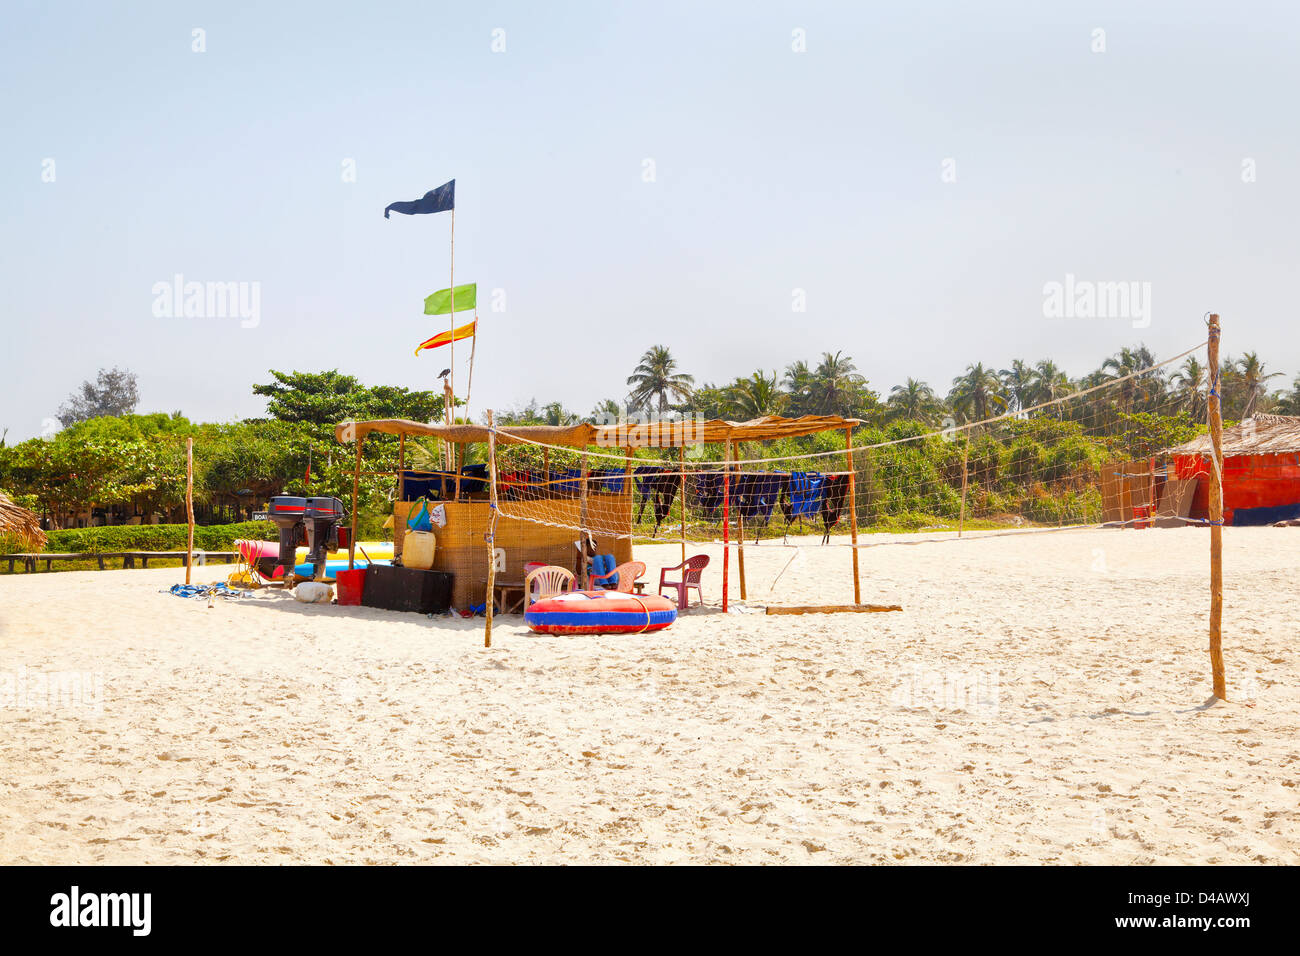 Beach landscape of beach volley ball court net, attendants hut and refreshments shack. A typical beach scene in tropics Stock Photo